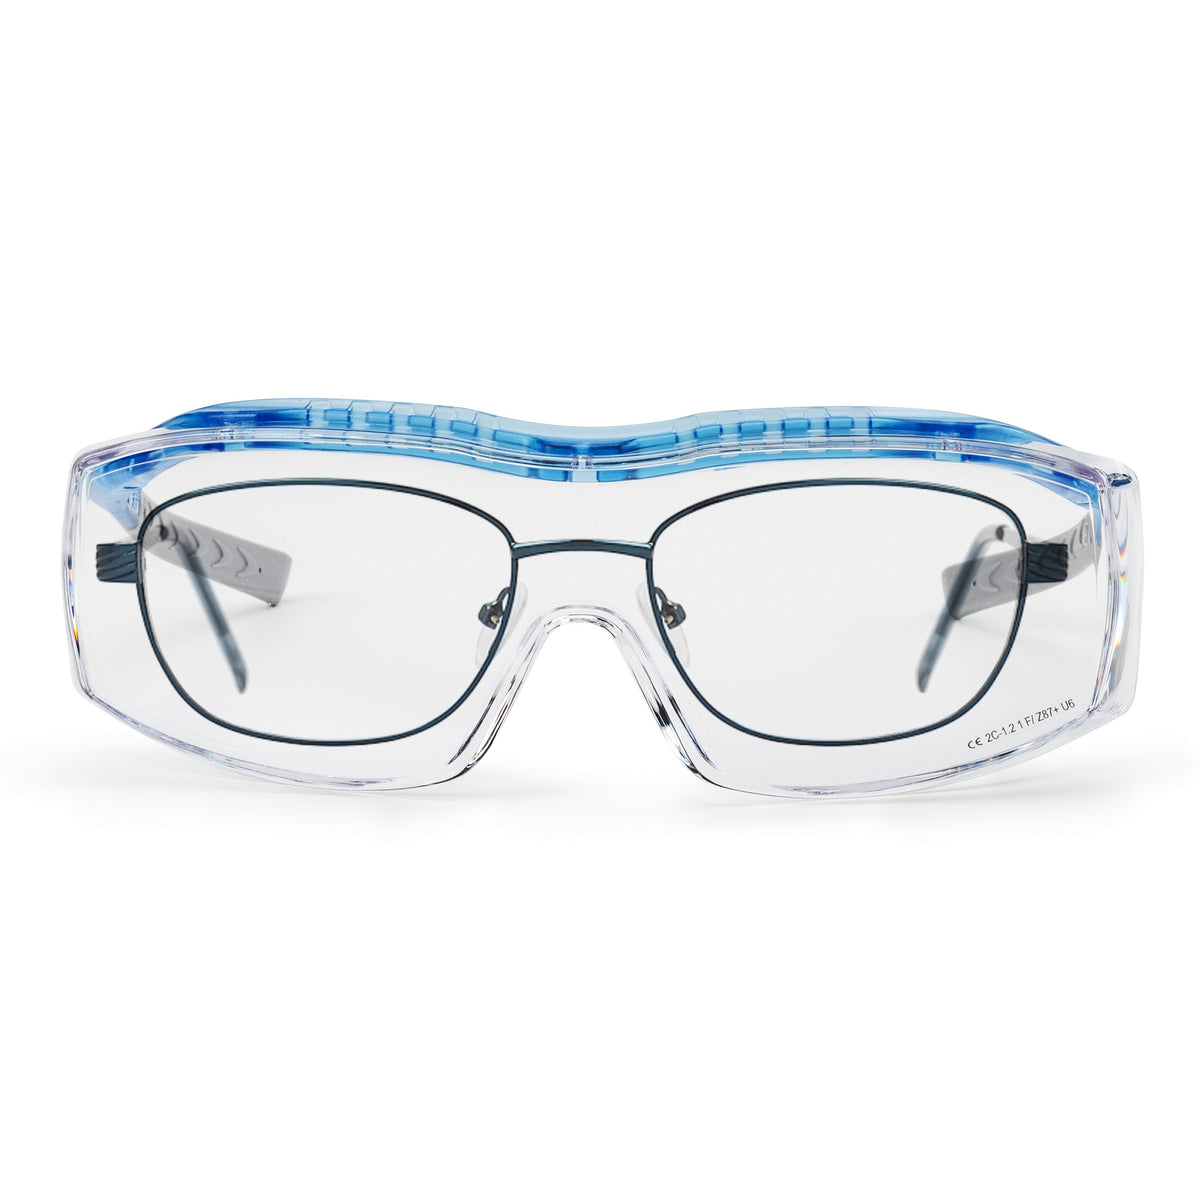 Solidwork Sw9320 Professional Safety Glasses With Integrated Side Prot Solidwork Protection